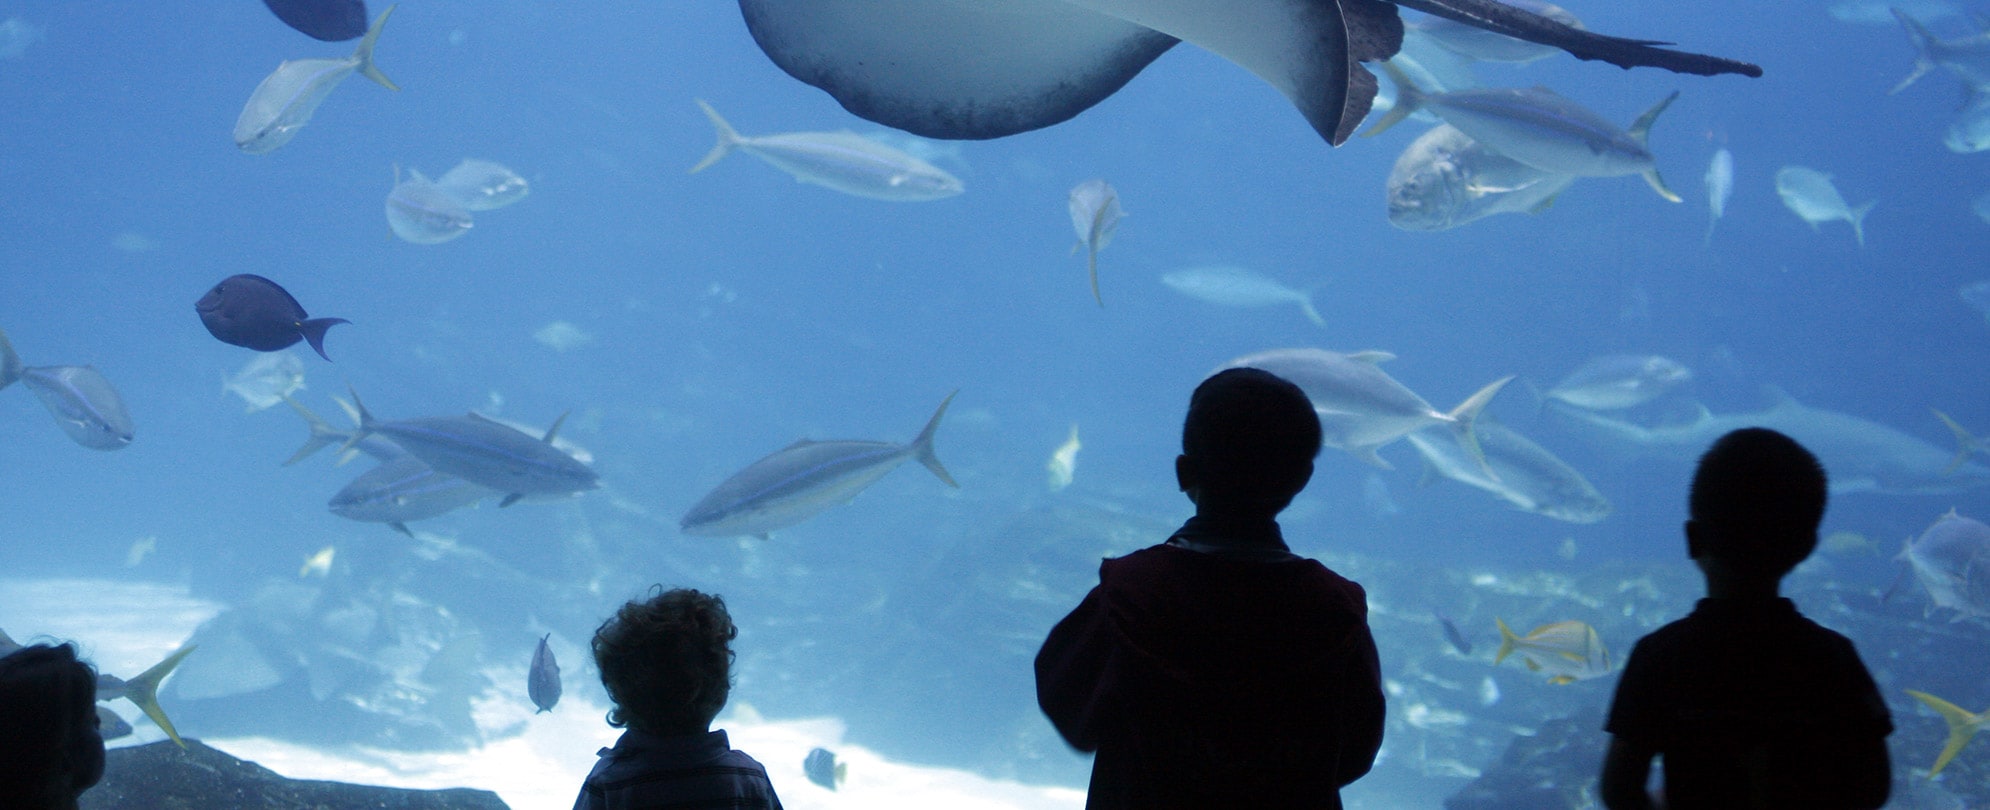 Kids look into the tank of fish and rays at the Birch Aquarium in San Diego, California.